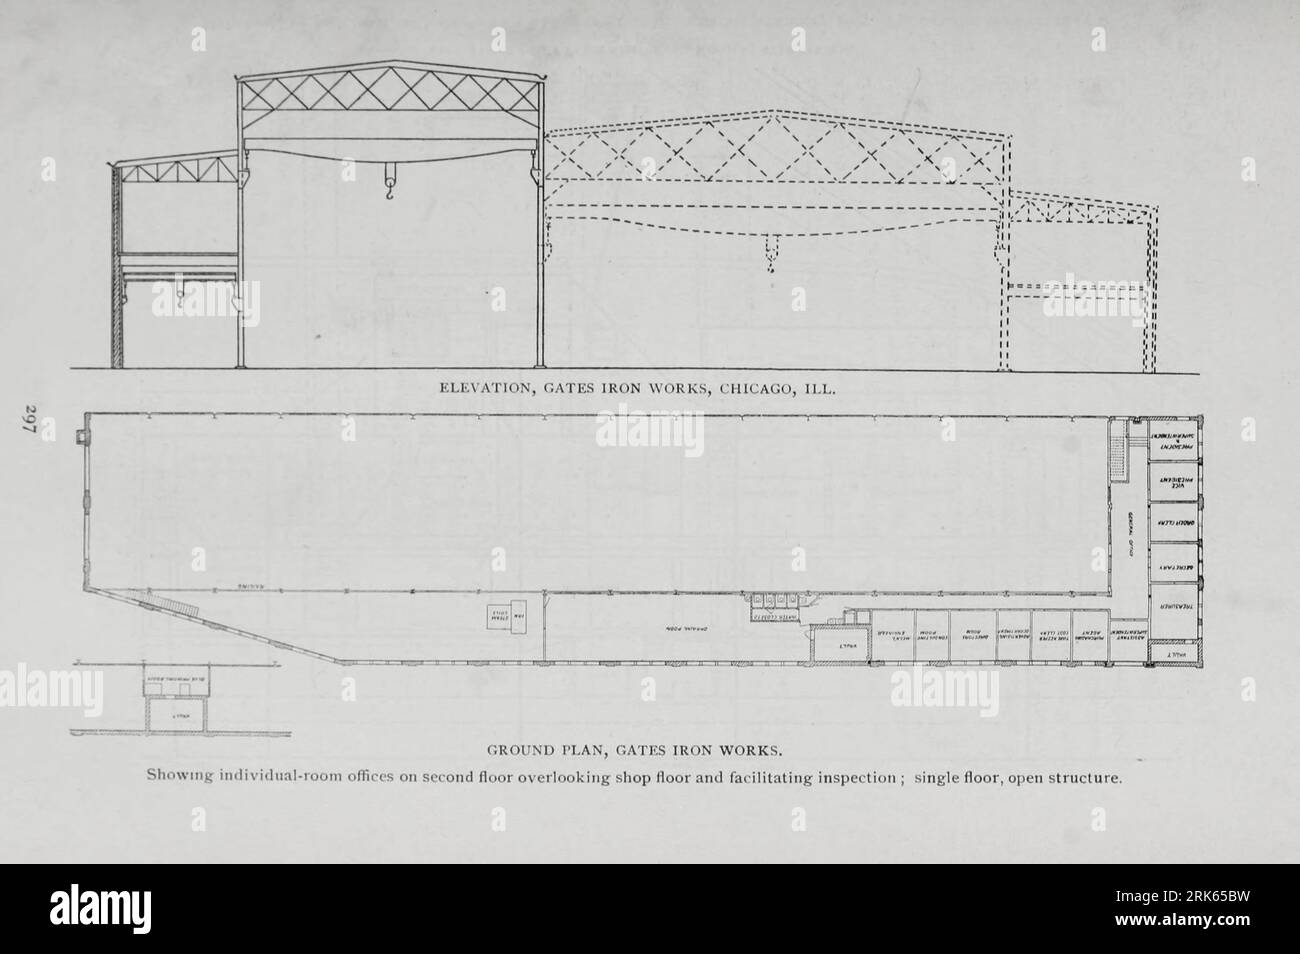 Floor Plan and elevation Gates Iron Works, Chicago, Illinois from the Article MODERN MACHINE-SHOP ECONOMICS PRIME REQUISITES OF SHOP CONSTRUCTION By Horace L. Arnold from The Engineering Magazine DEVOTED TO INDUSTRIAL PROGRESS Volume XI October 1896 NEW YORK The Engineering Magazine Co Stock Photo